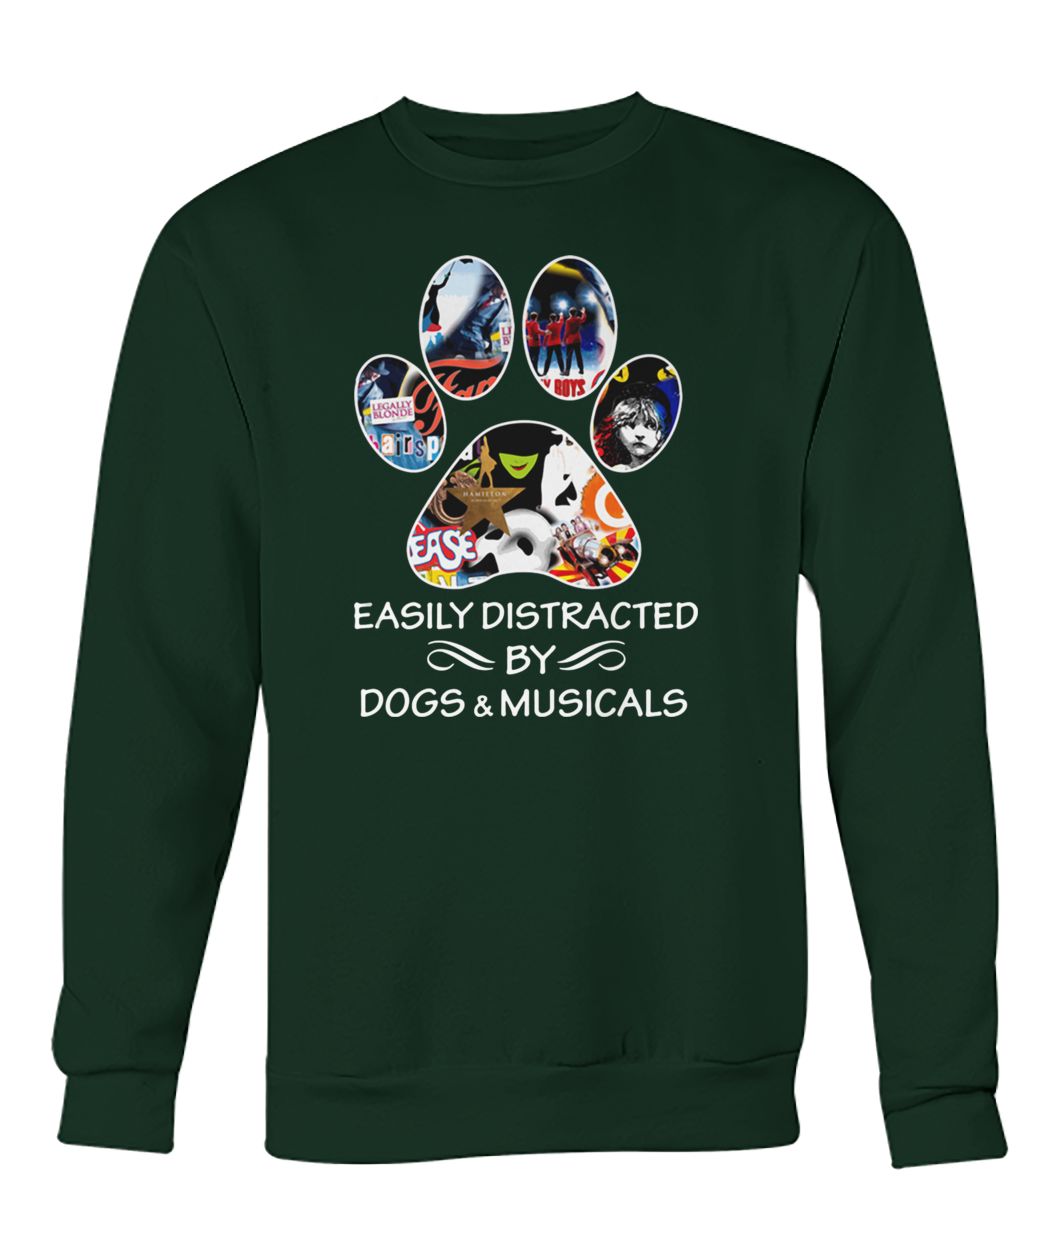 Broadway easily distracted by dogs and musicals crew neck sweatshirt